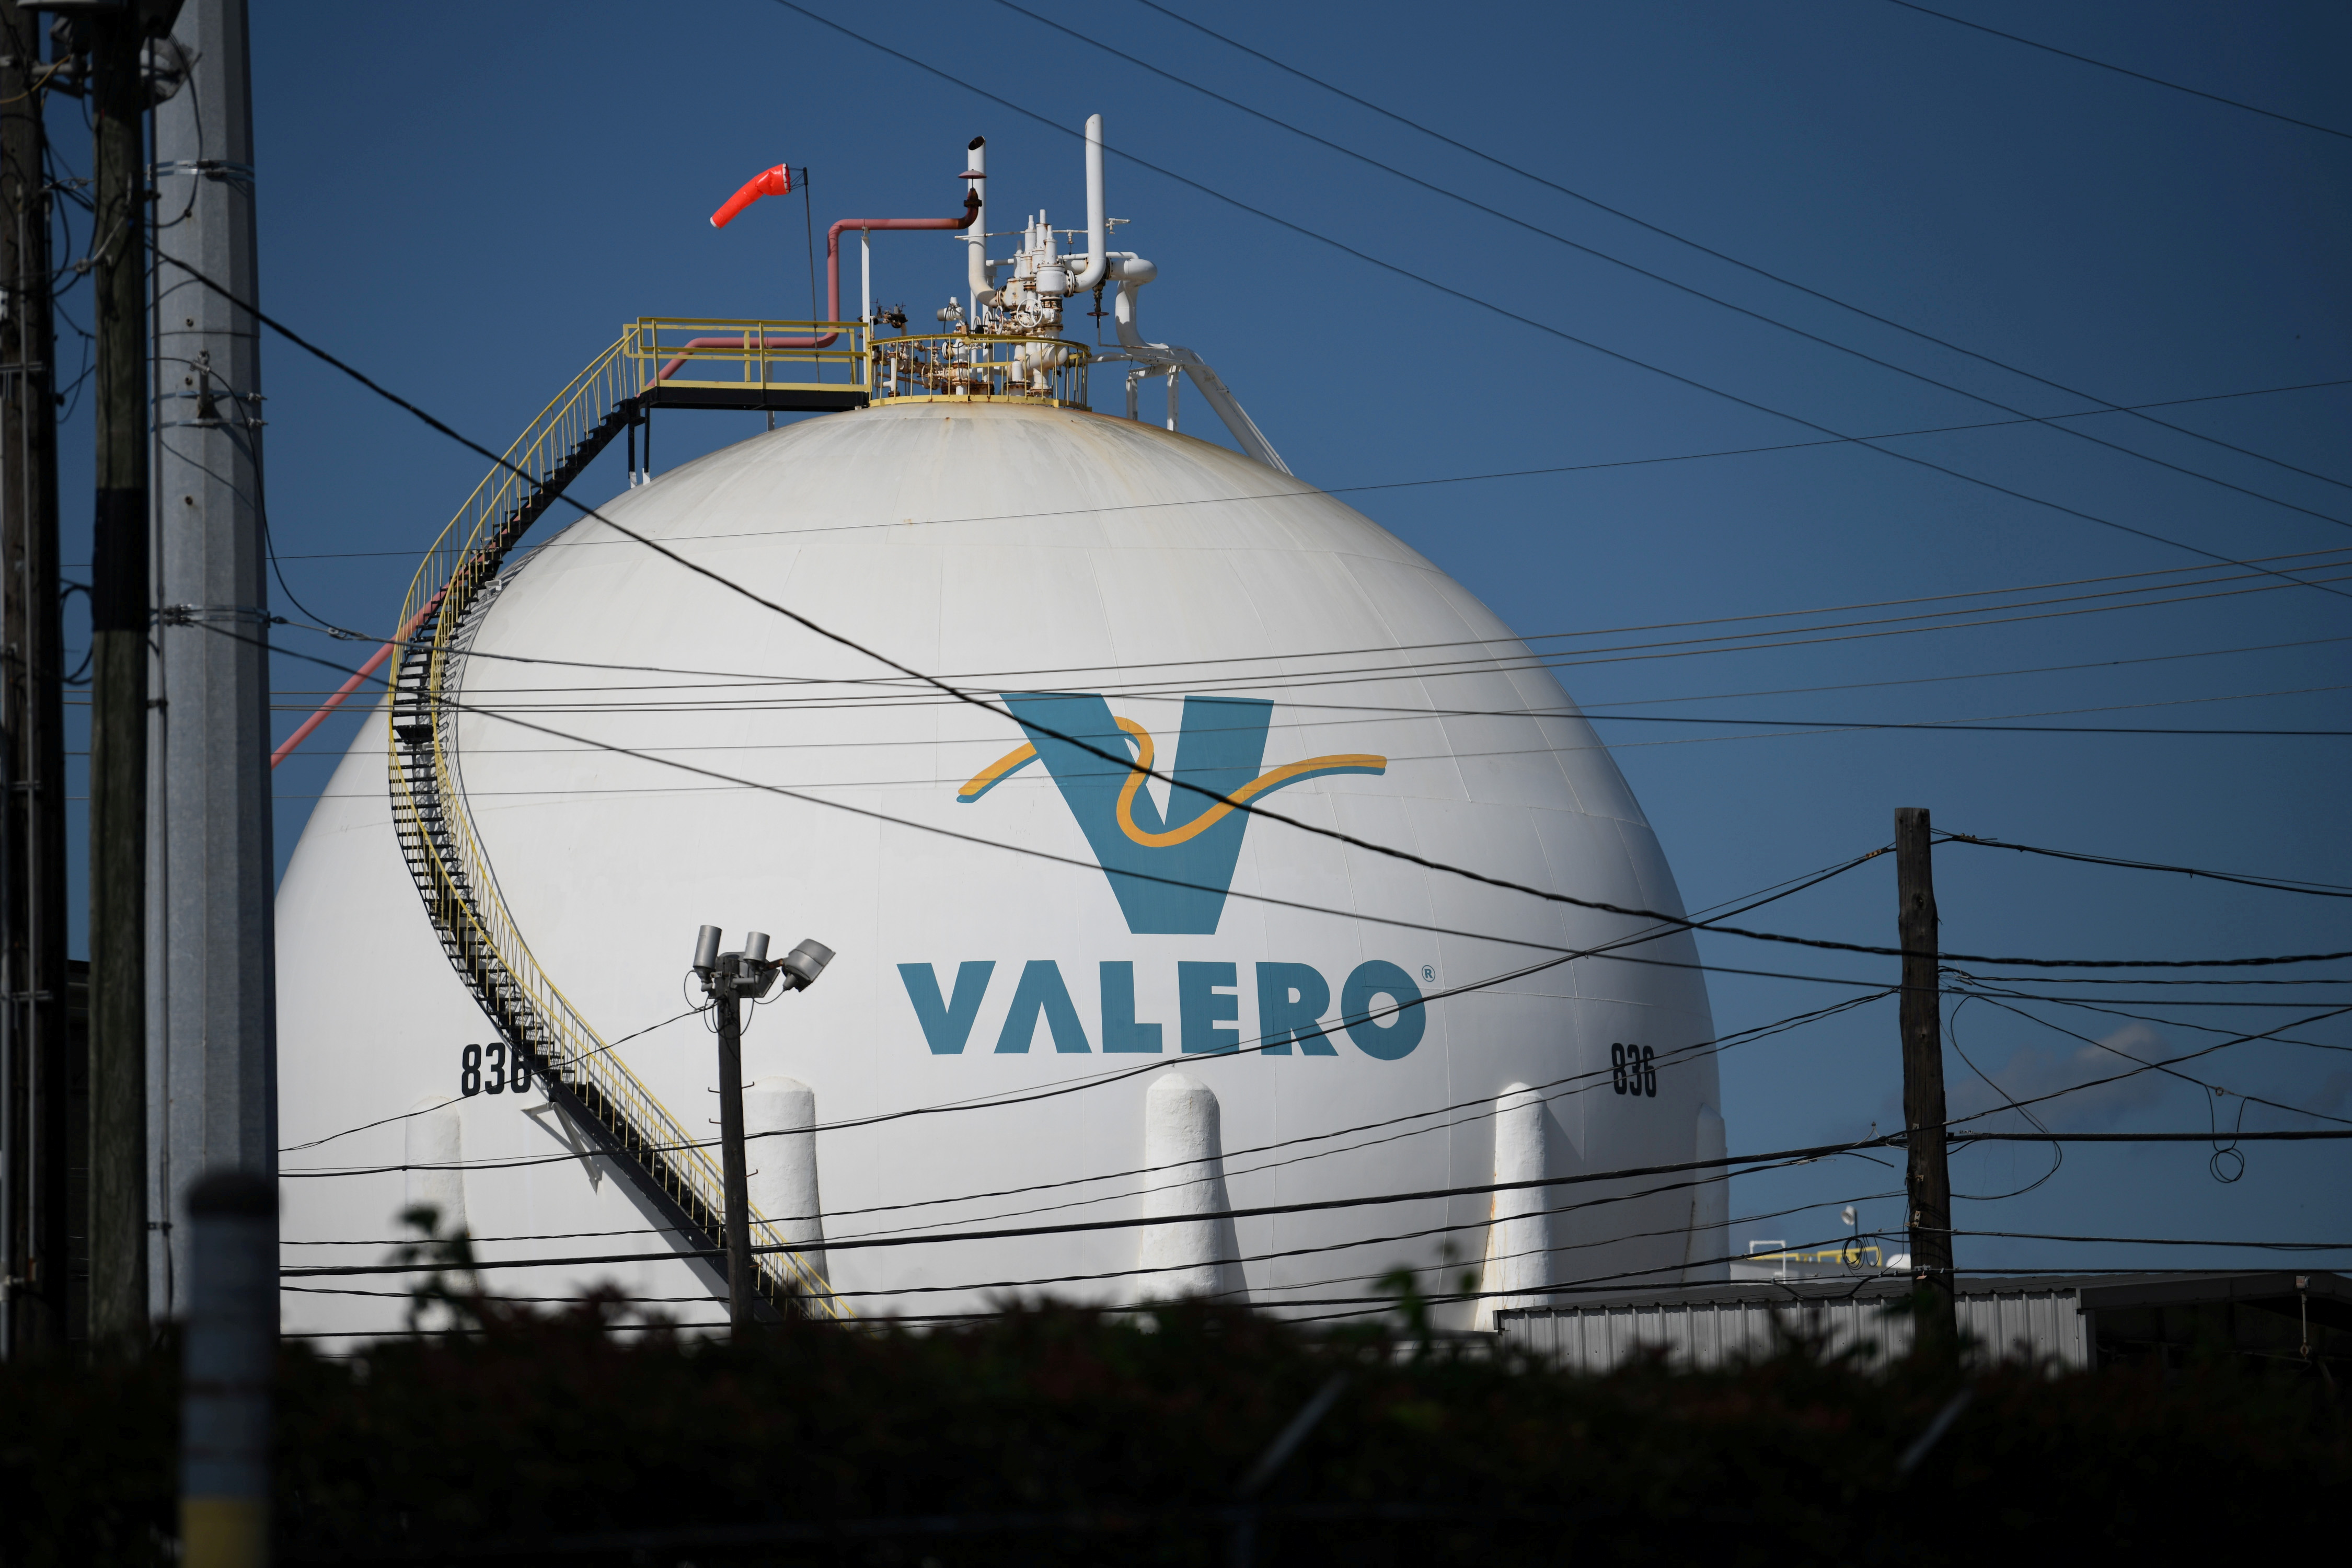 The Valero refinery next to the Houston Ship Channel is seen in Houston, Texas, U.S., May 5, 2019. REUTERS/Loren Elliott